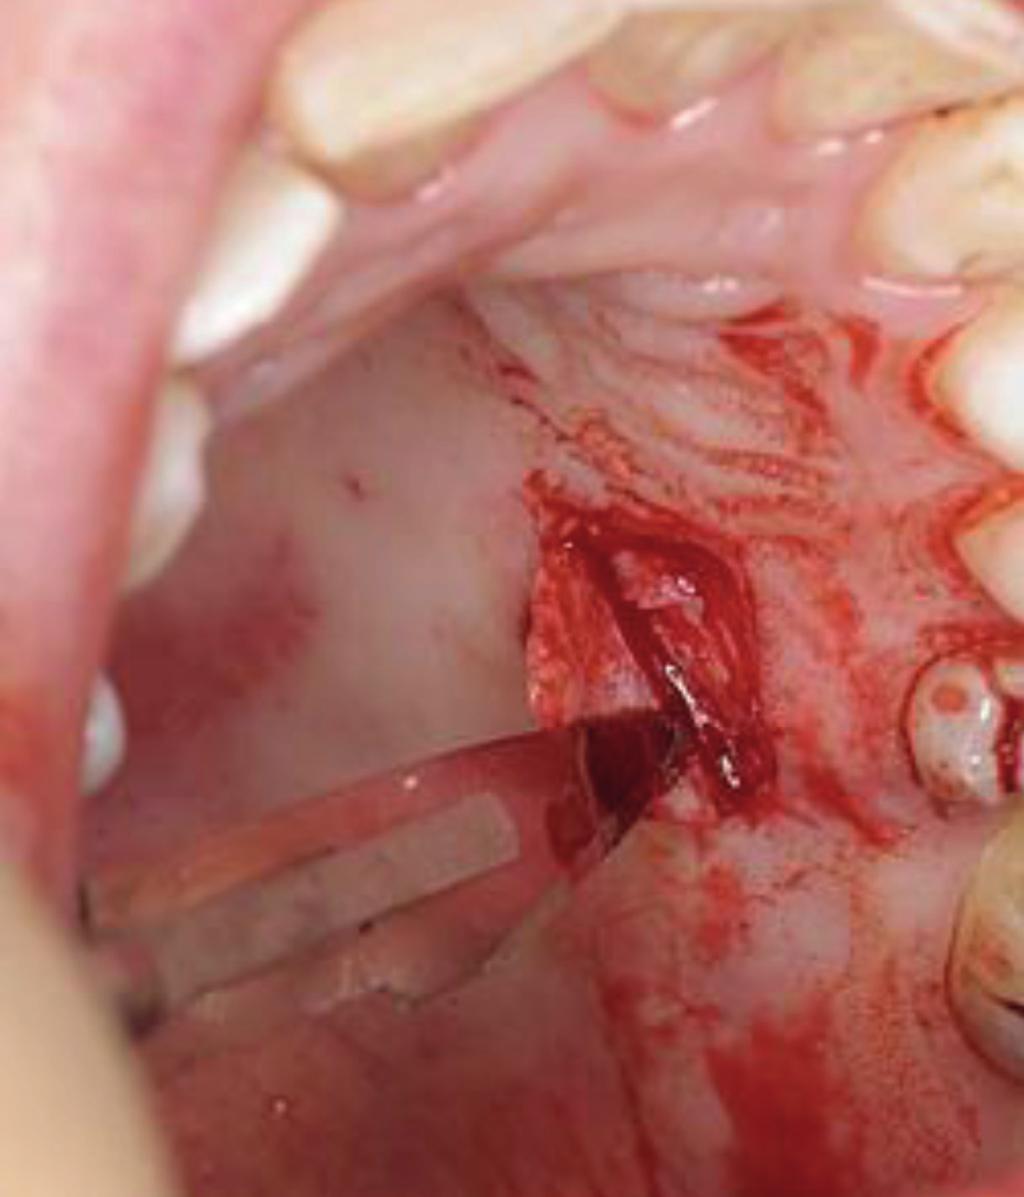 The remainder of this article will focus on the description of the free gingival graft which is particularly effective in the treatment of localised recession defects in the mandible that cannot be